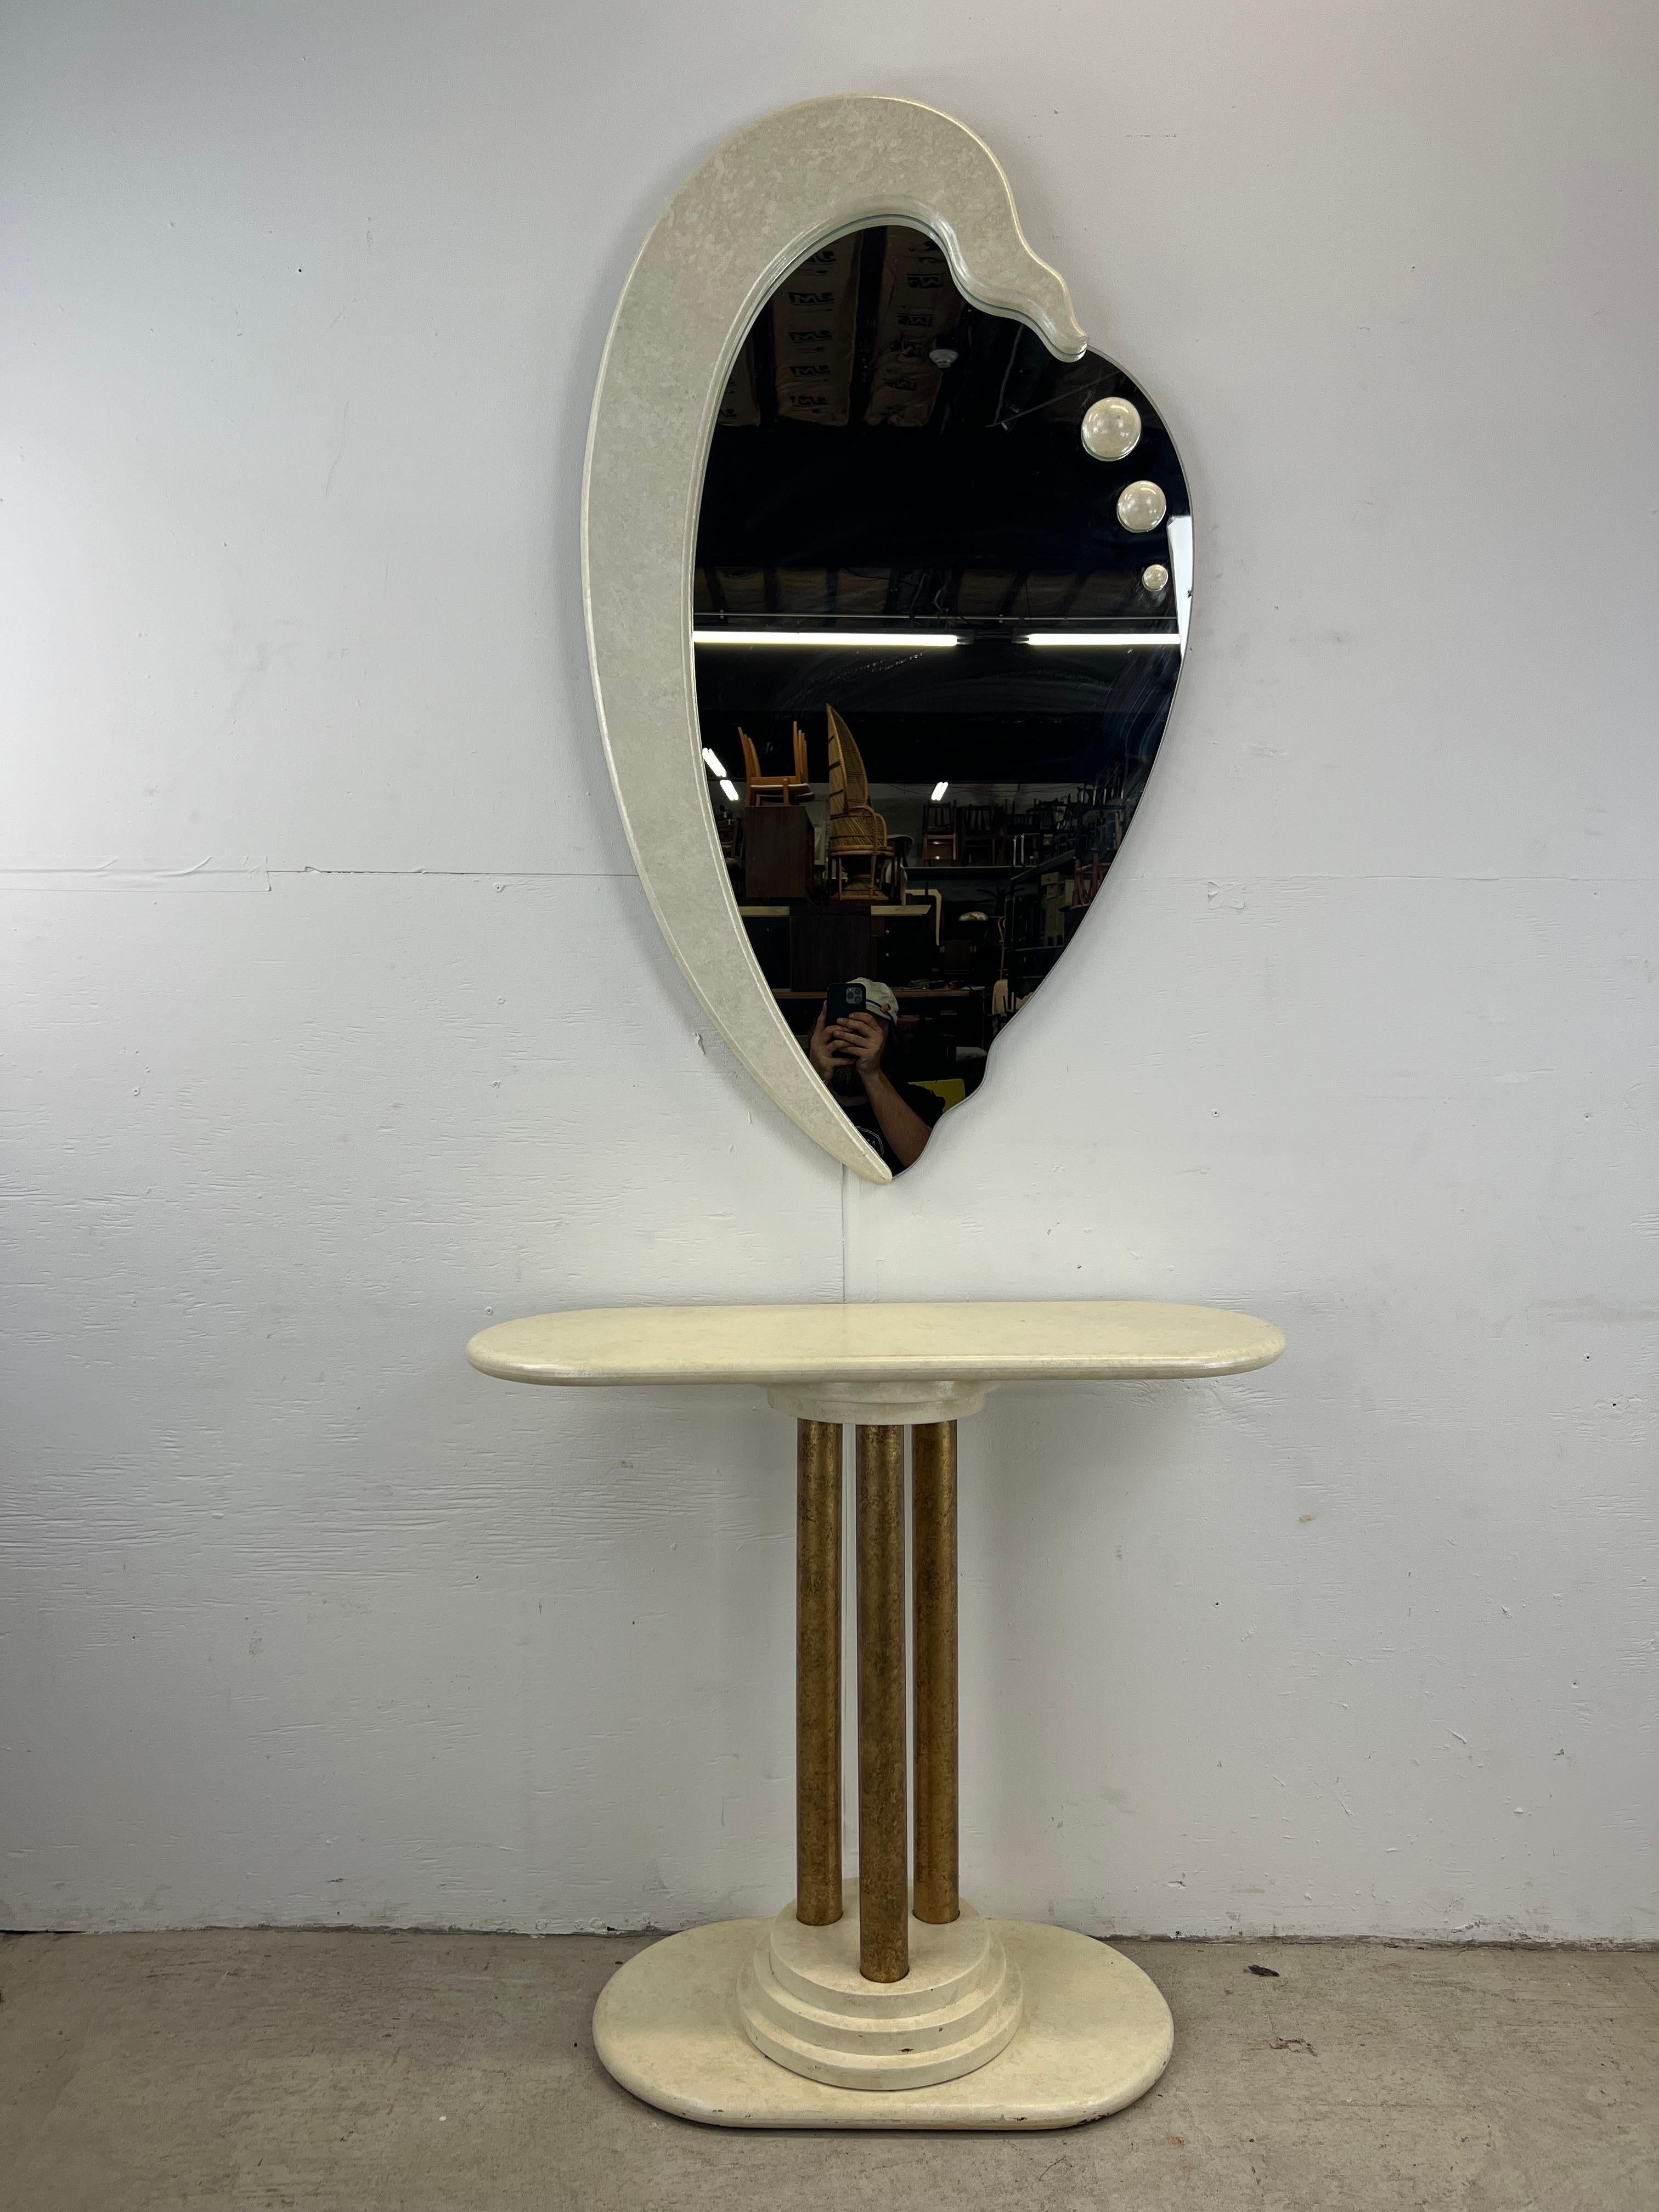 This vintage postmodern mirror & pedestal set features unique shaped mirror with three dimensional details and a white lacquer pedestal with brass accented posts and step base.

Mirror Dimensions: 26.5w 2.5d 46h
Pedestal Dimensions: 33w 12d